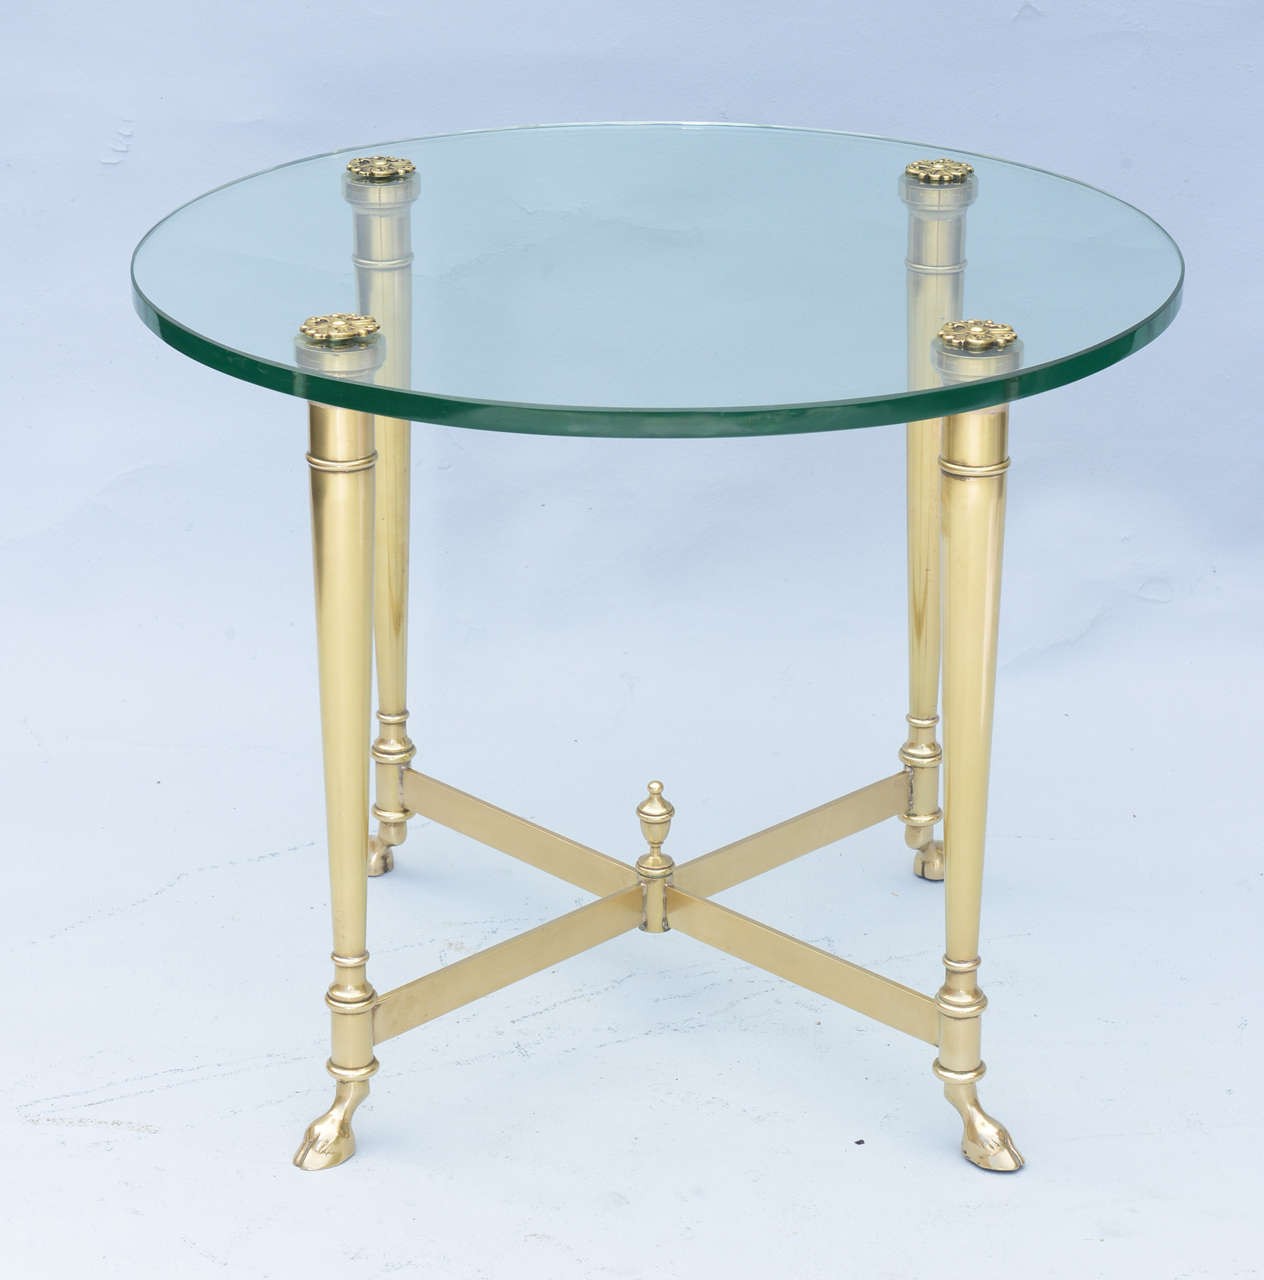 Polished brass end table with glass top on hoffed feet